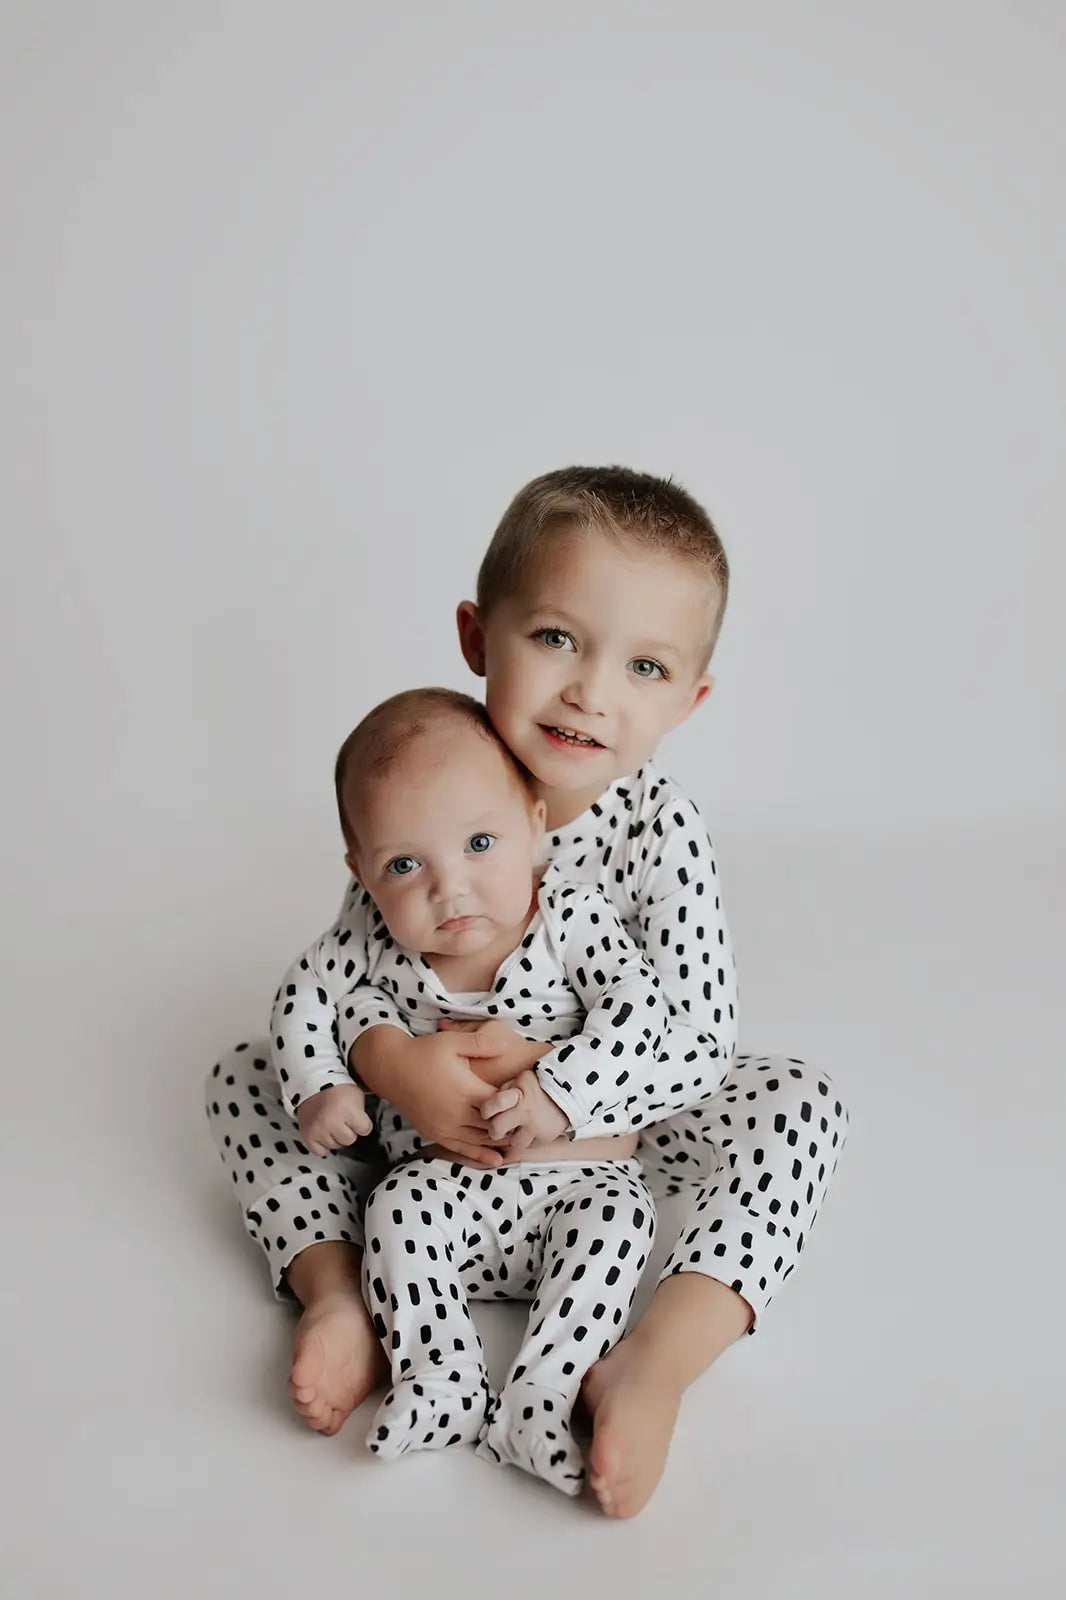 Dot Jammies Kids Pjs and Lougewear (Matching with siblings)SOLD OUT